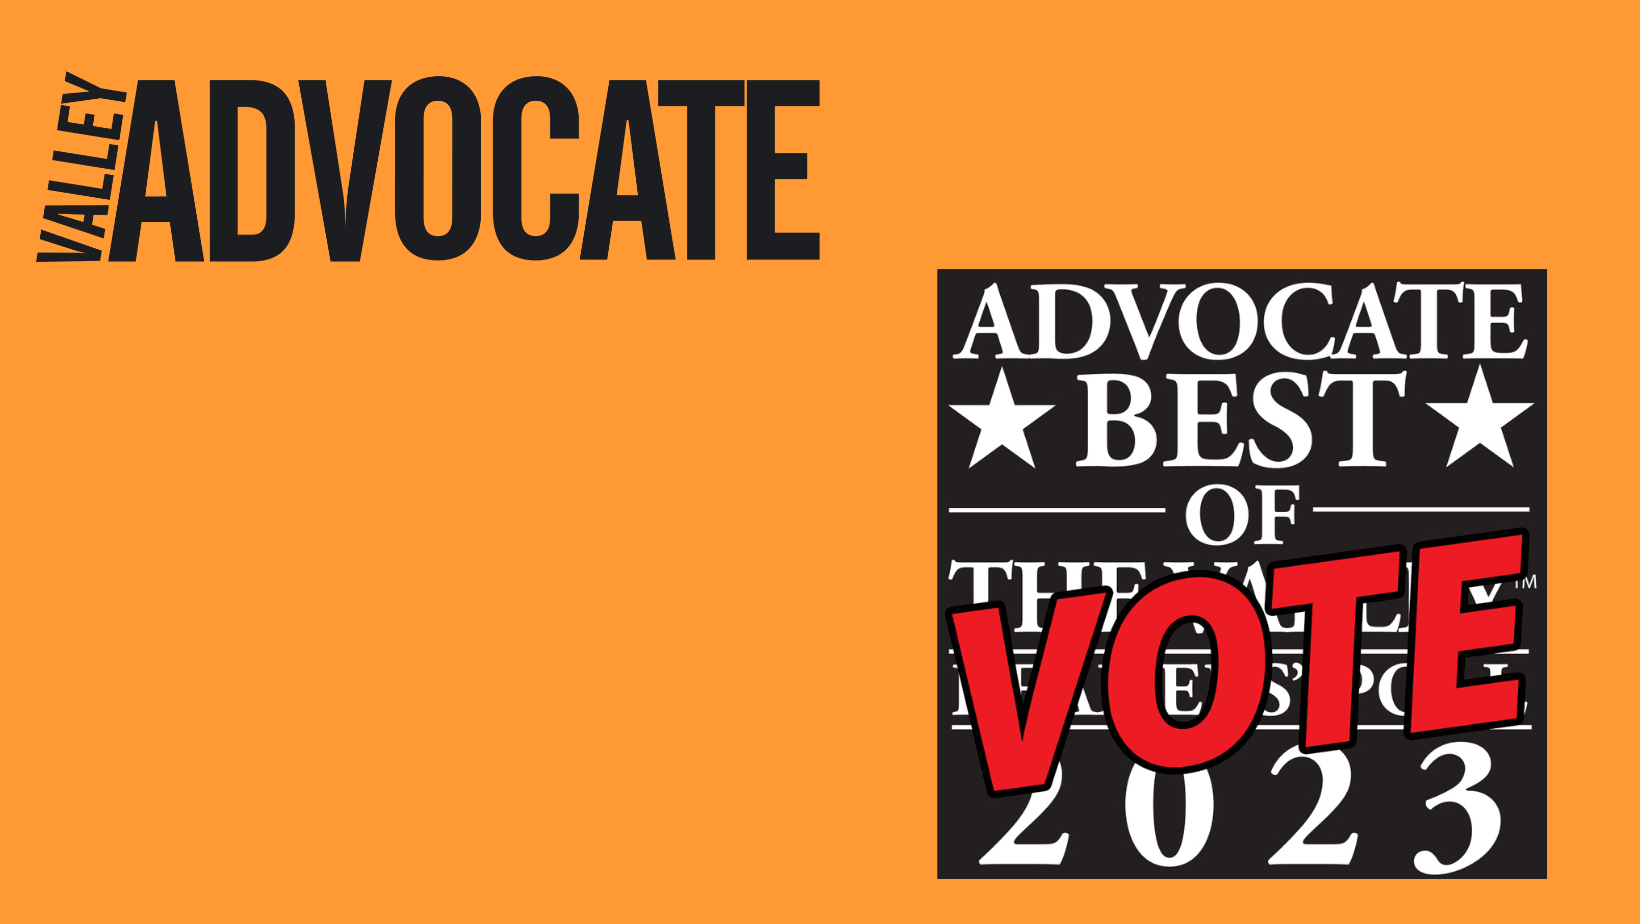 Valley Advocate Best of